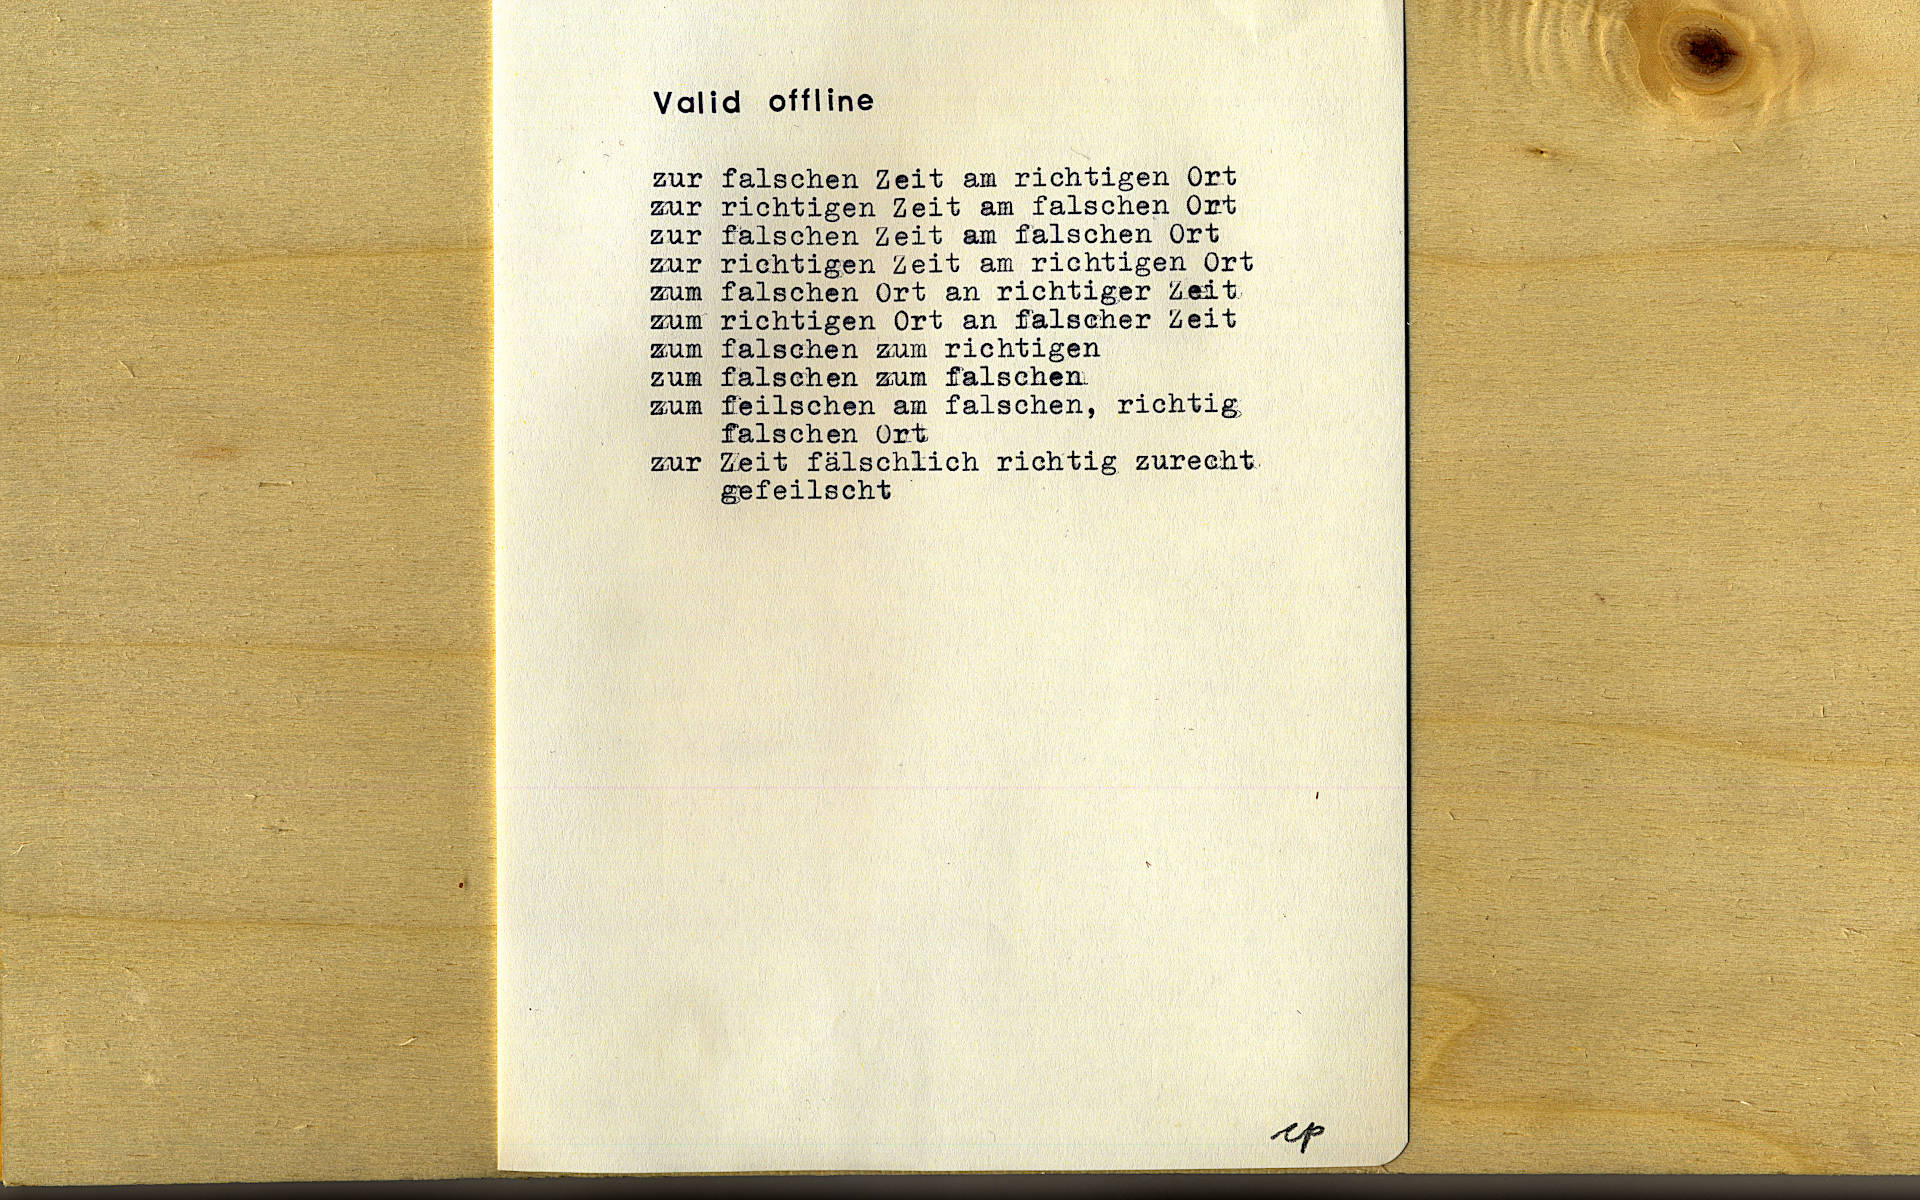 scan of the poem, written with a typewriter on a sheet of paper. in the background there is plywood.